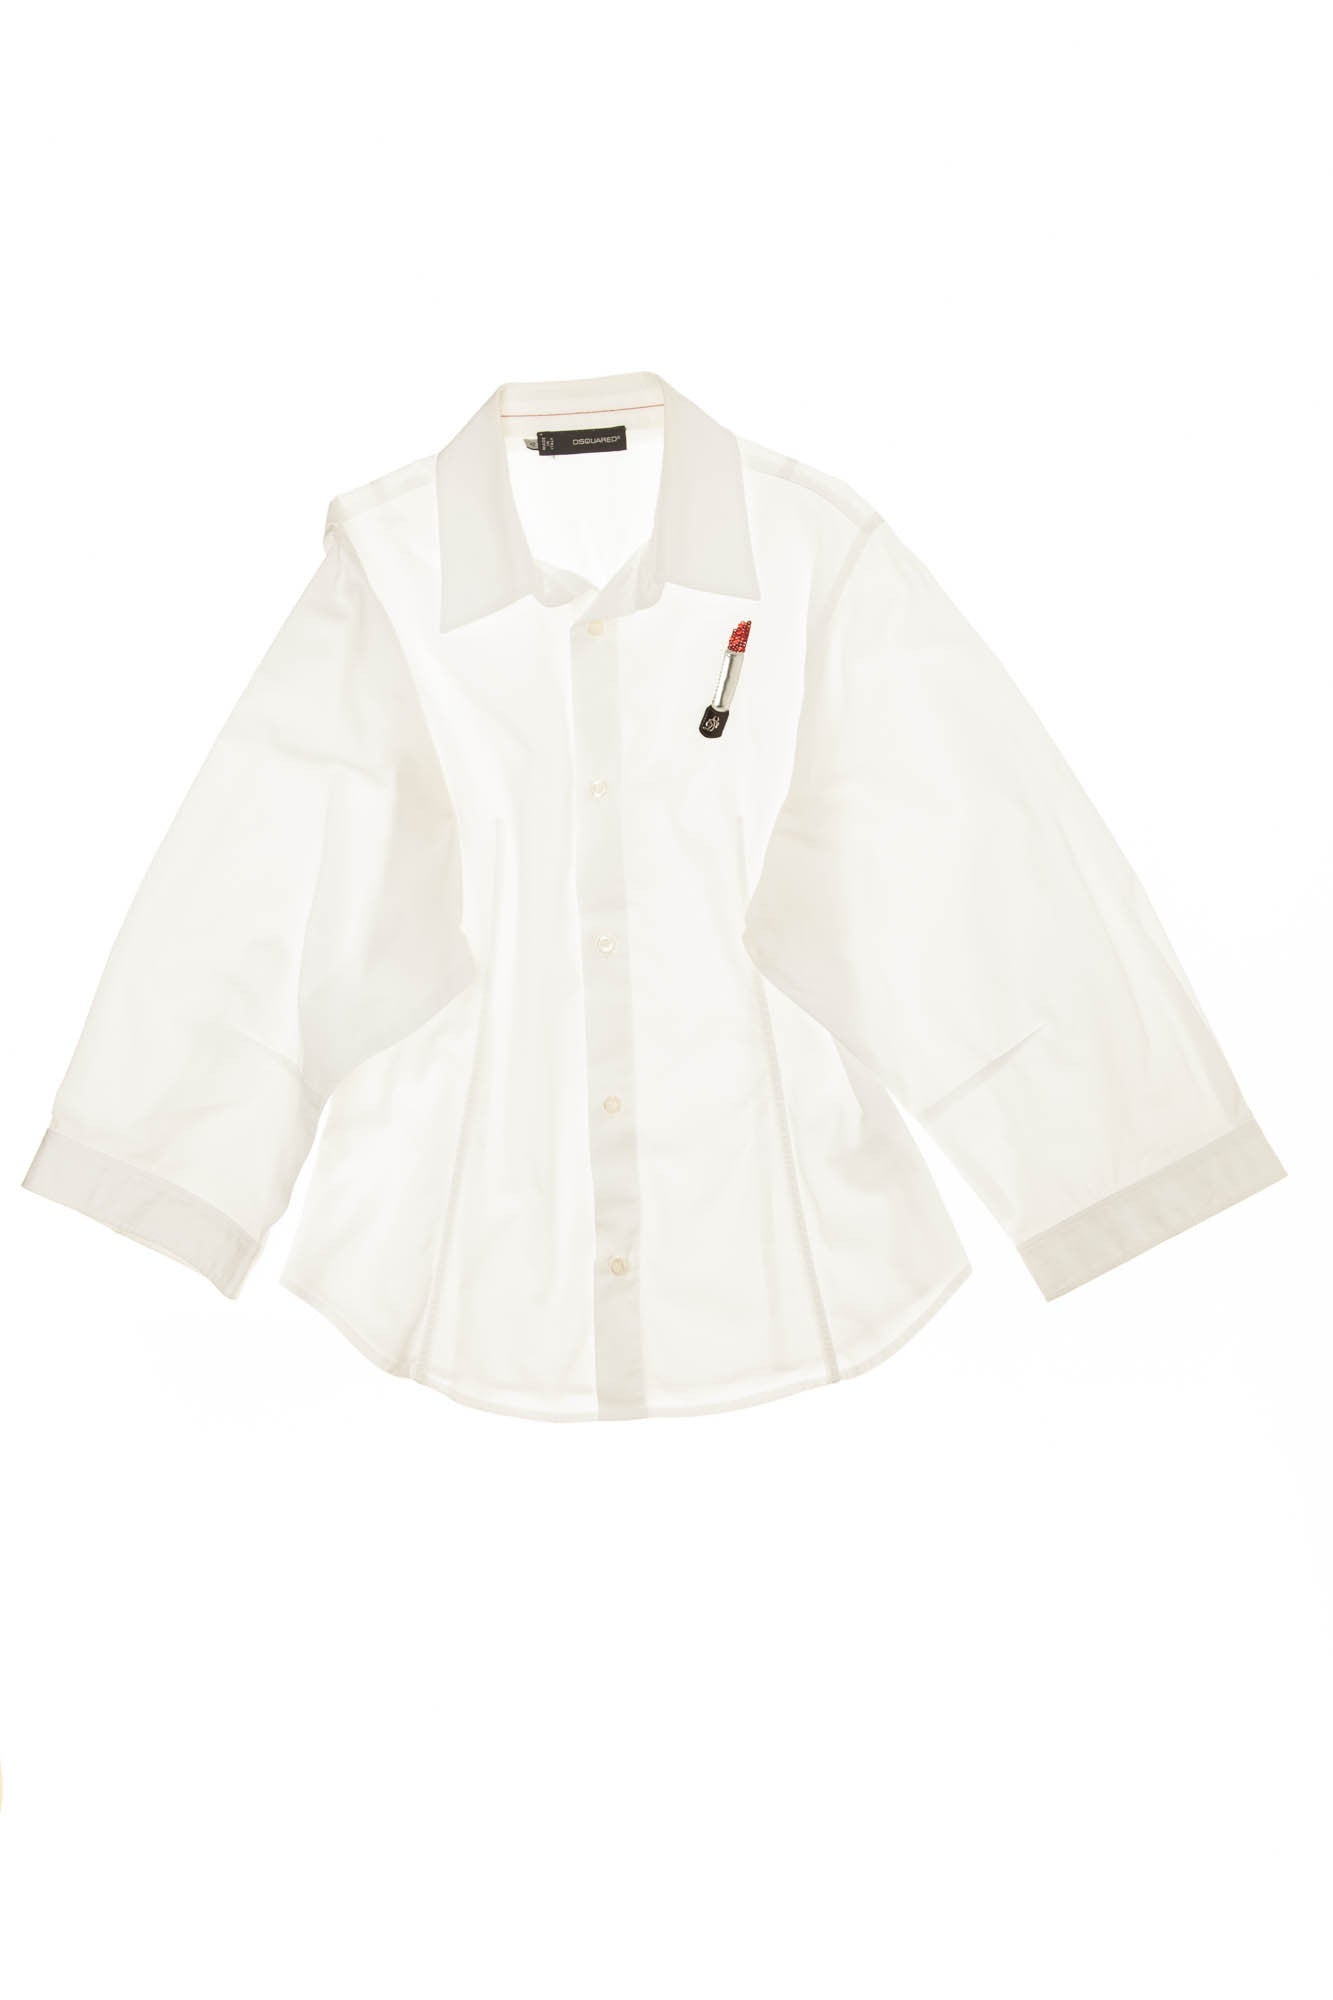 Dsquared2 - White Long Sleeve Button Up with Lipstick - 42 – LUXHAVE